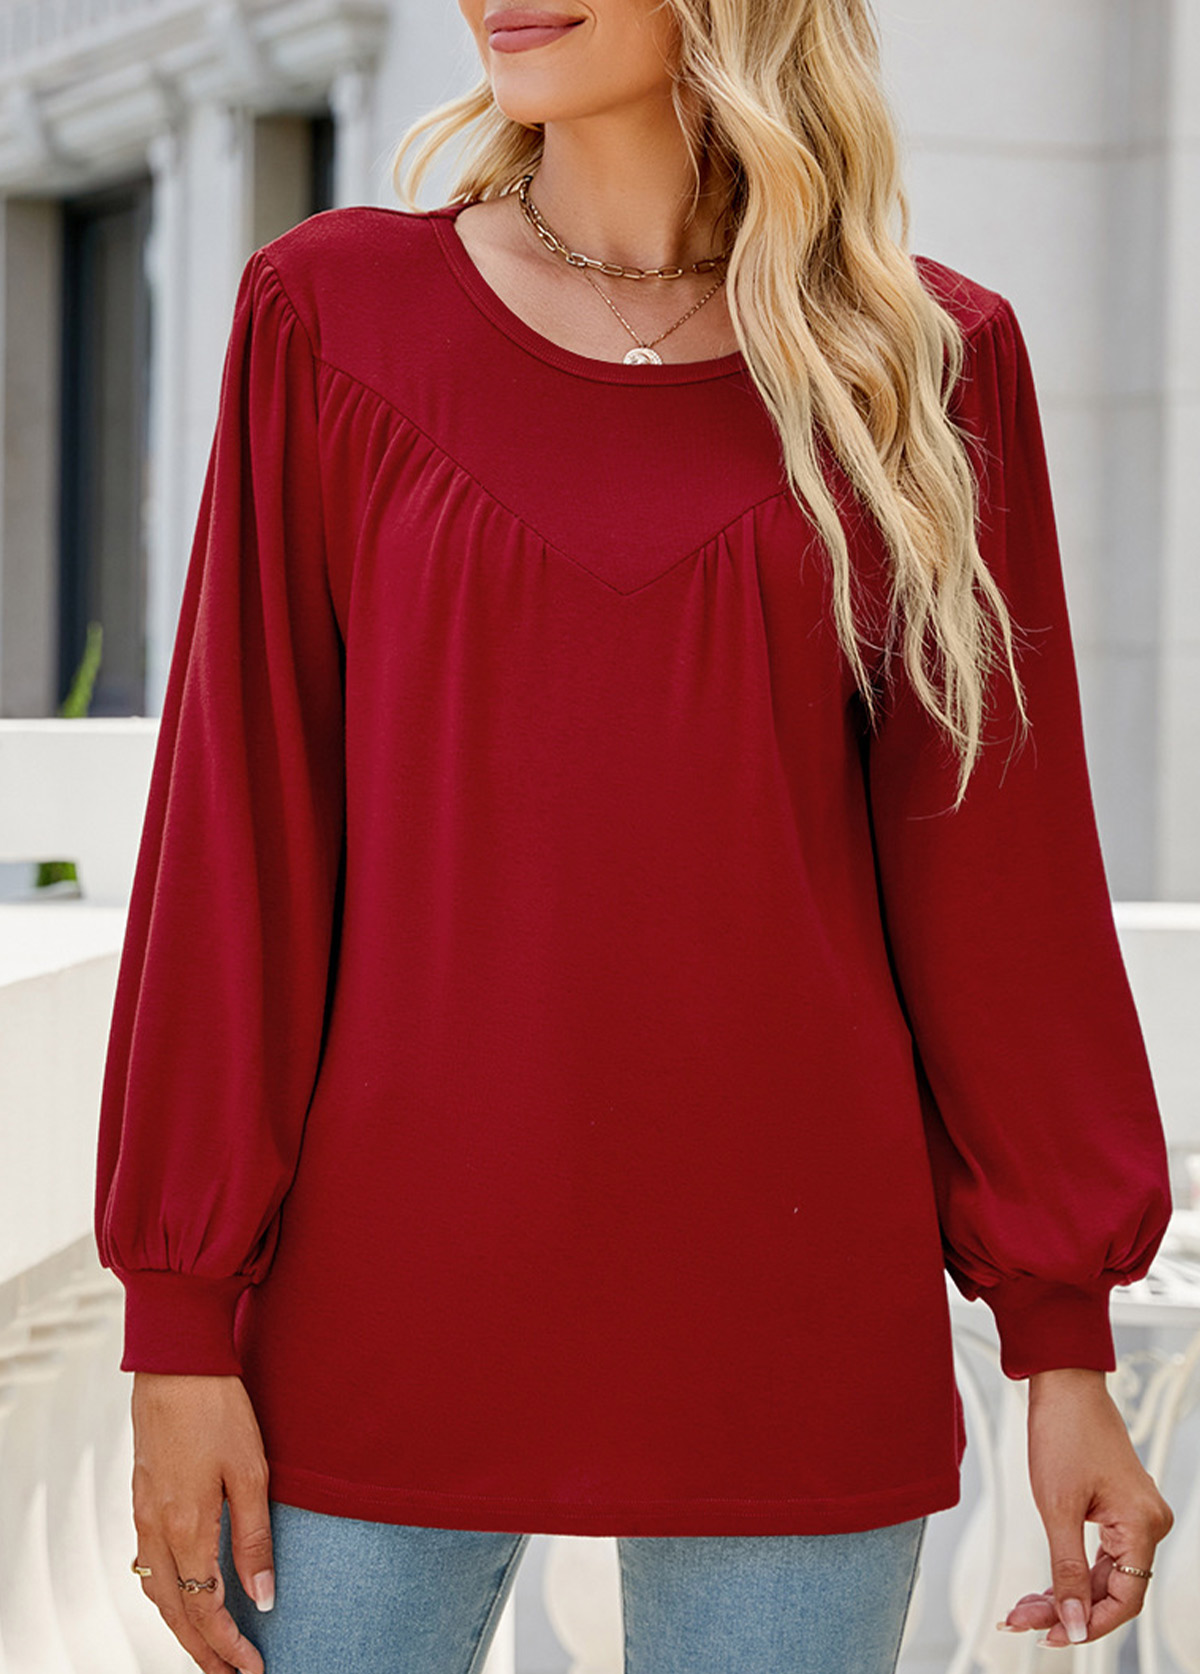 Patchwork Wine Red Round Neck Long Sleeve Blouse